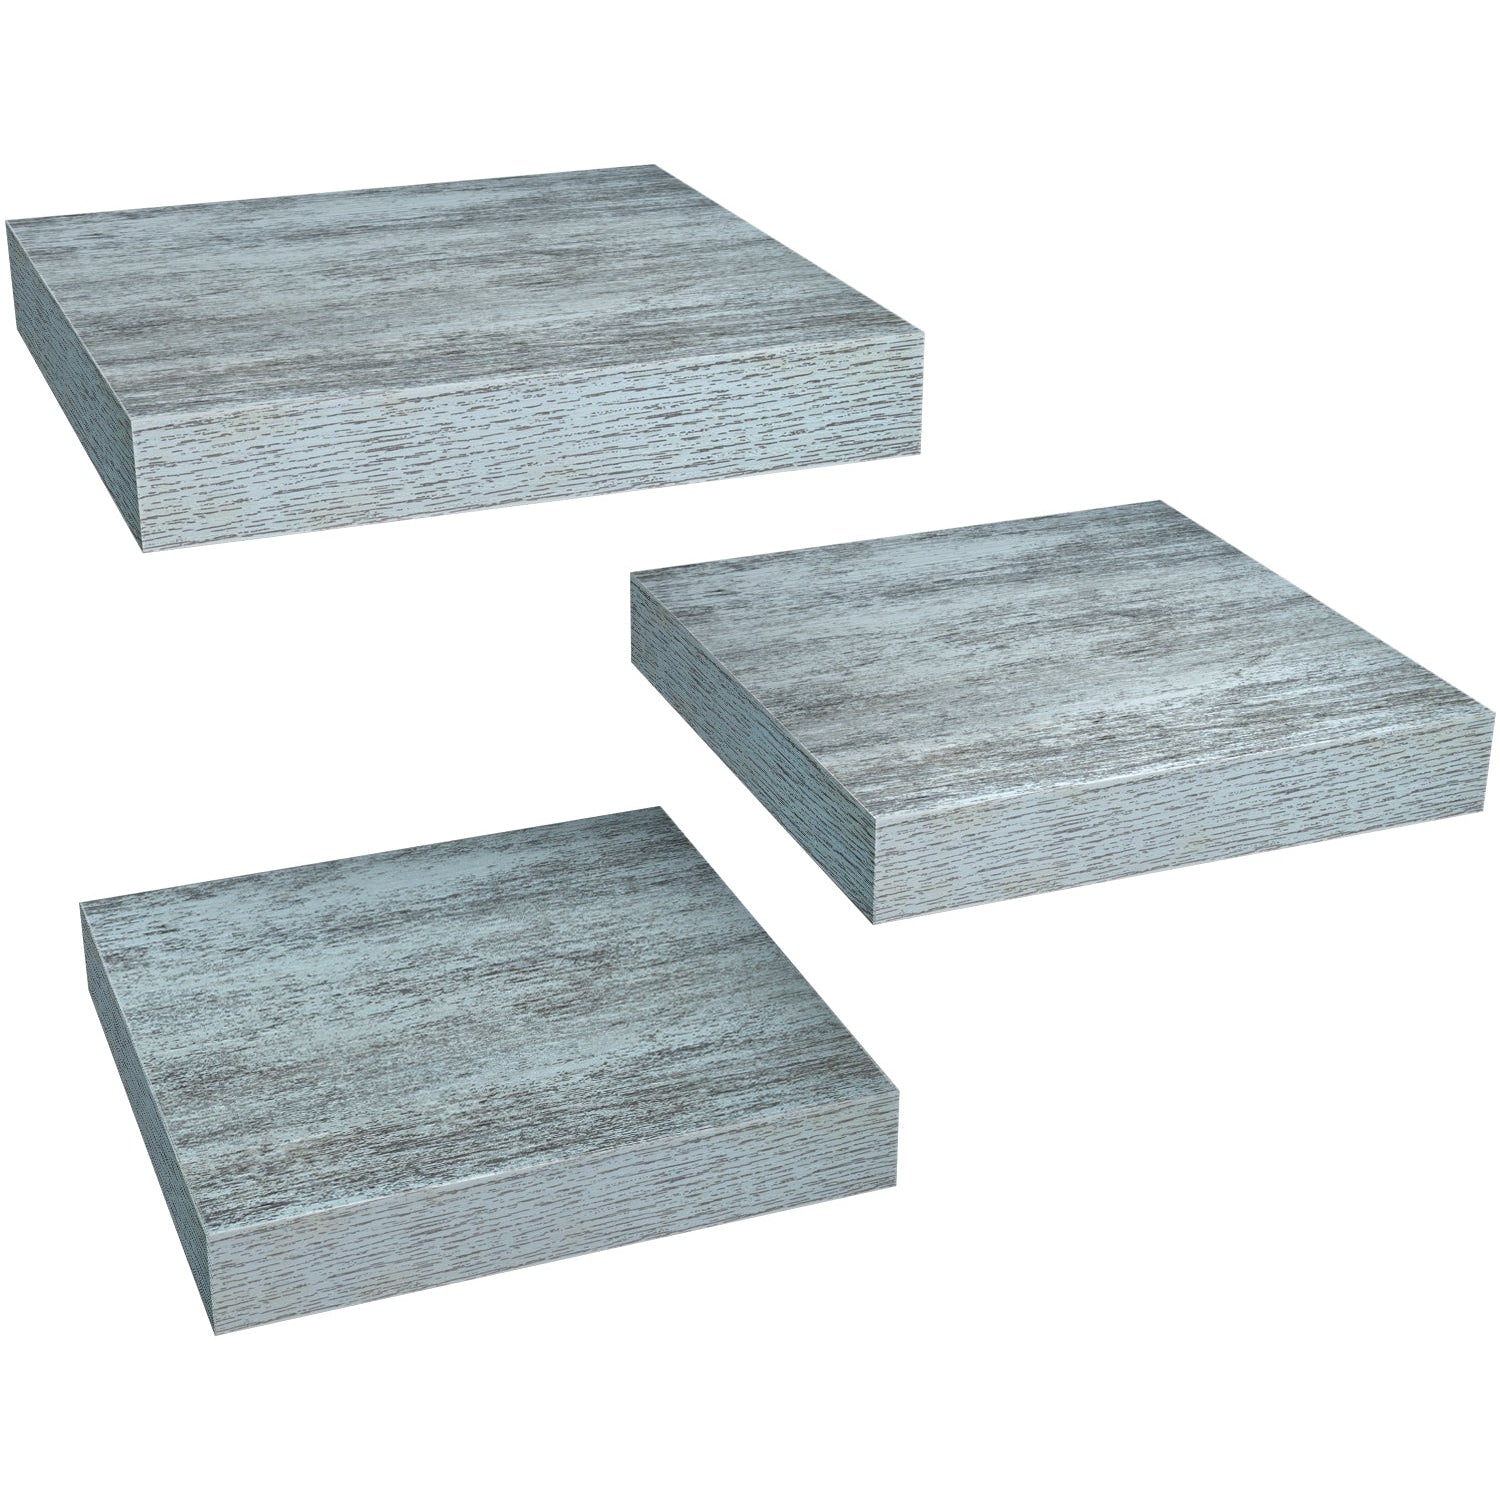 Rustic Floating Square Shelves (3-Pack)